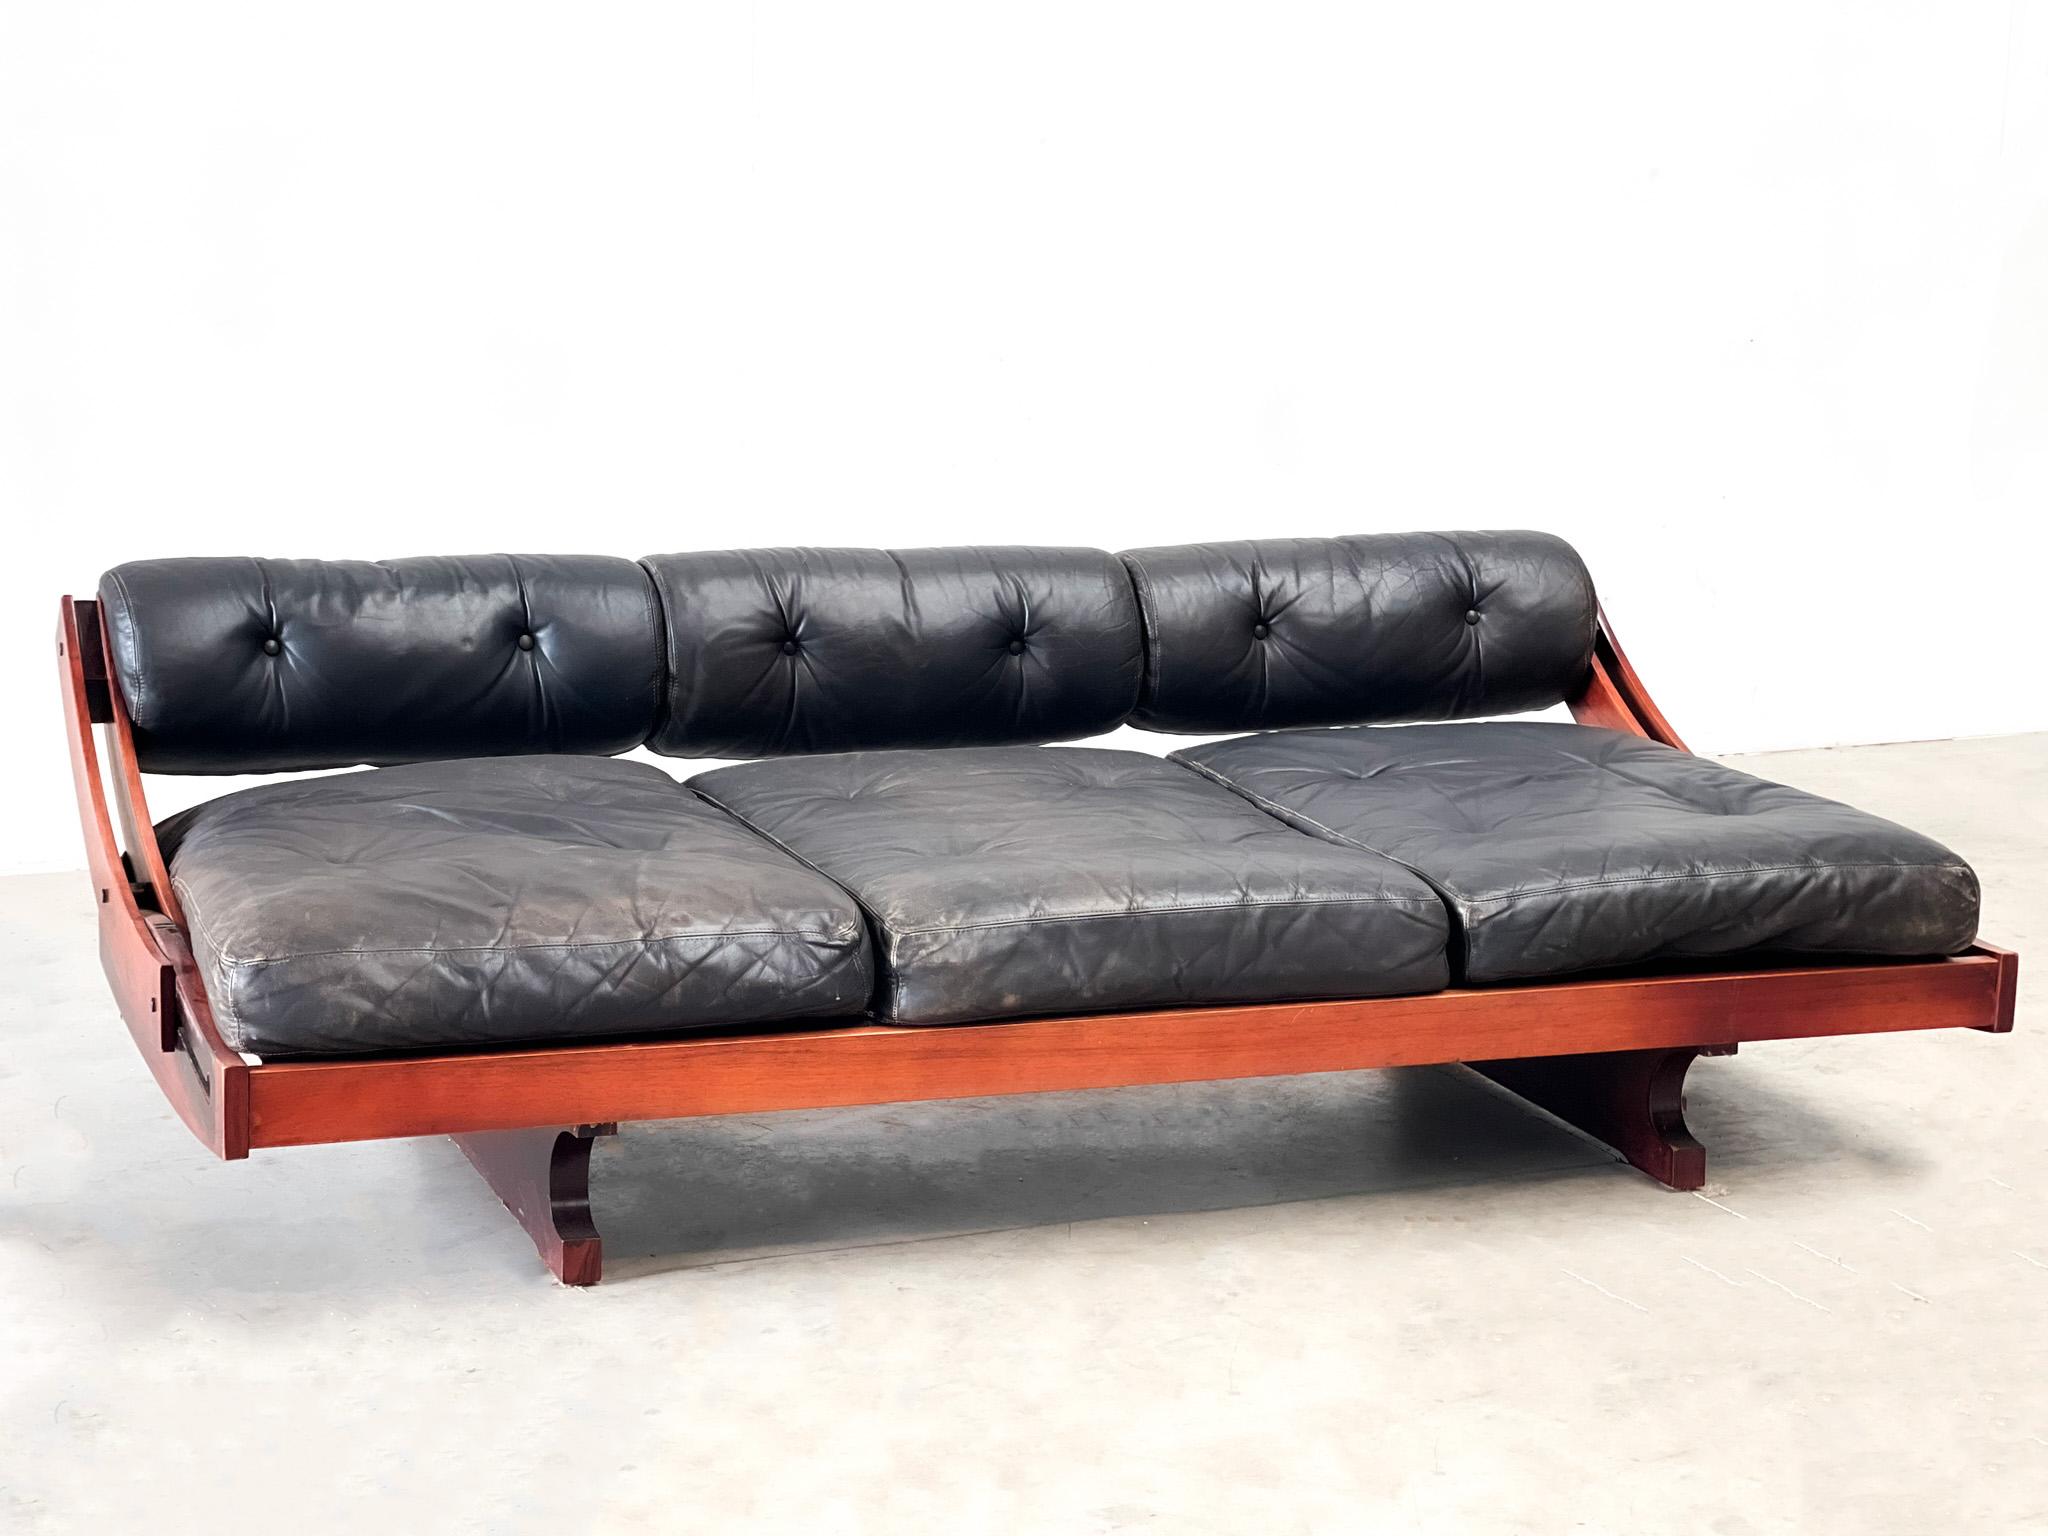 Wood GS195 black leather sofa or daybed by Gianni Songia